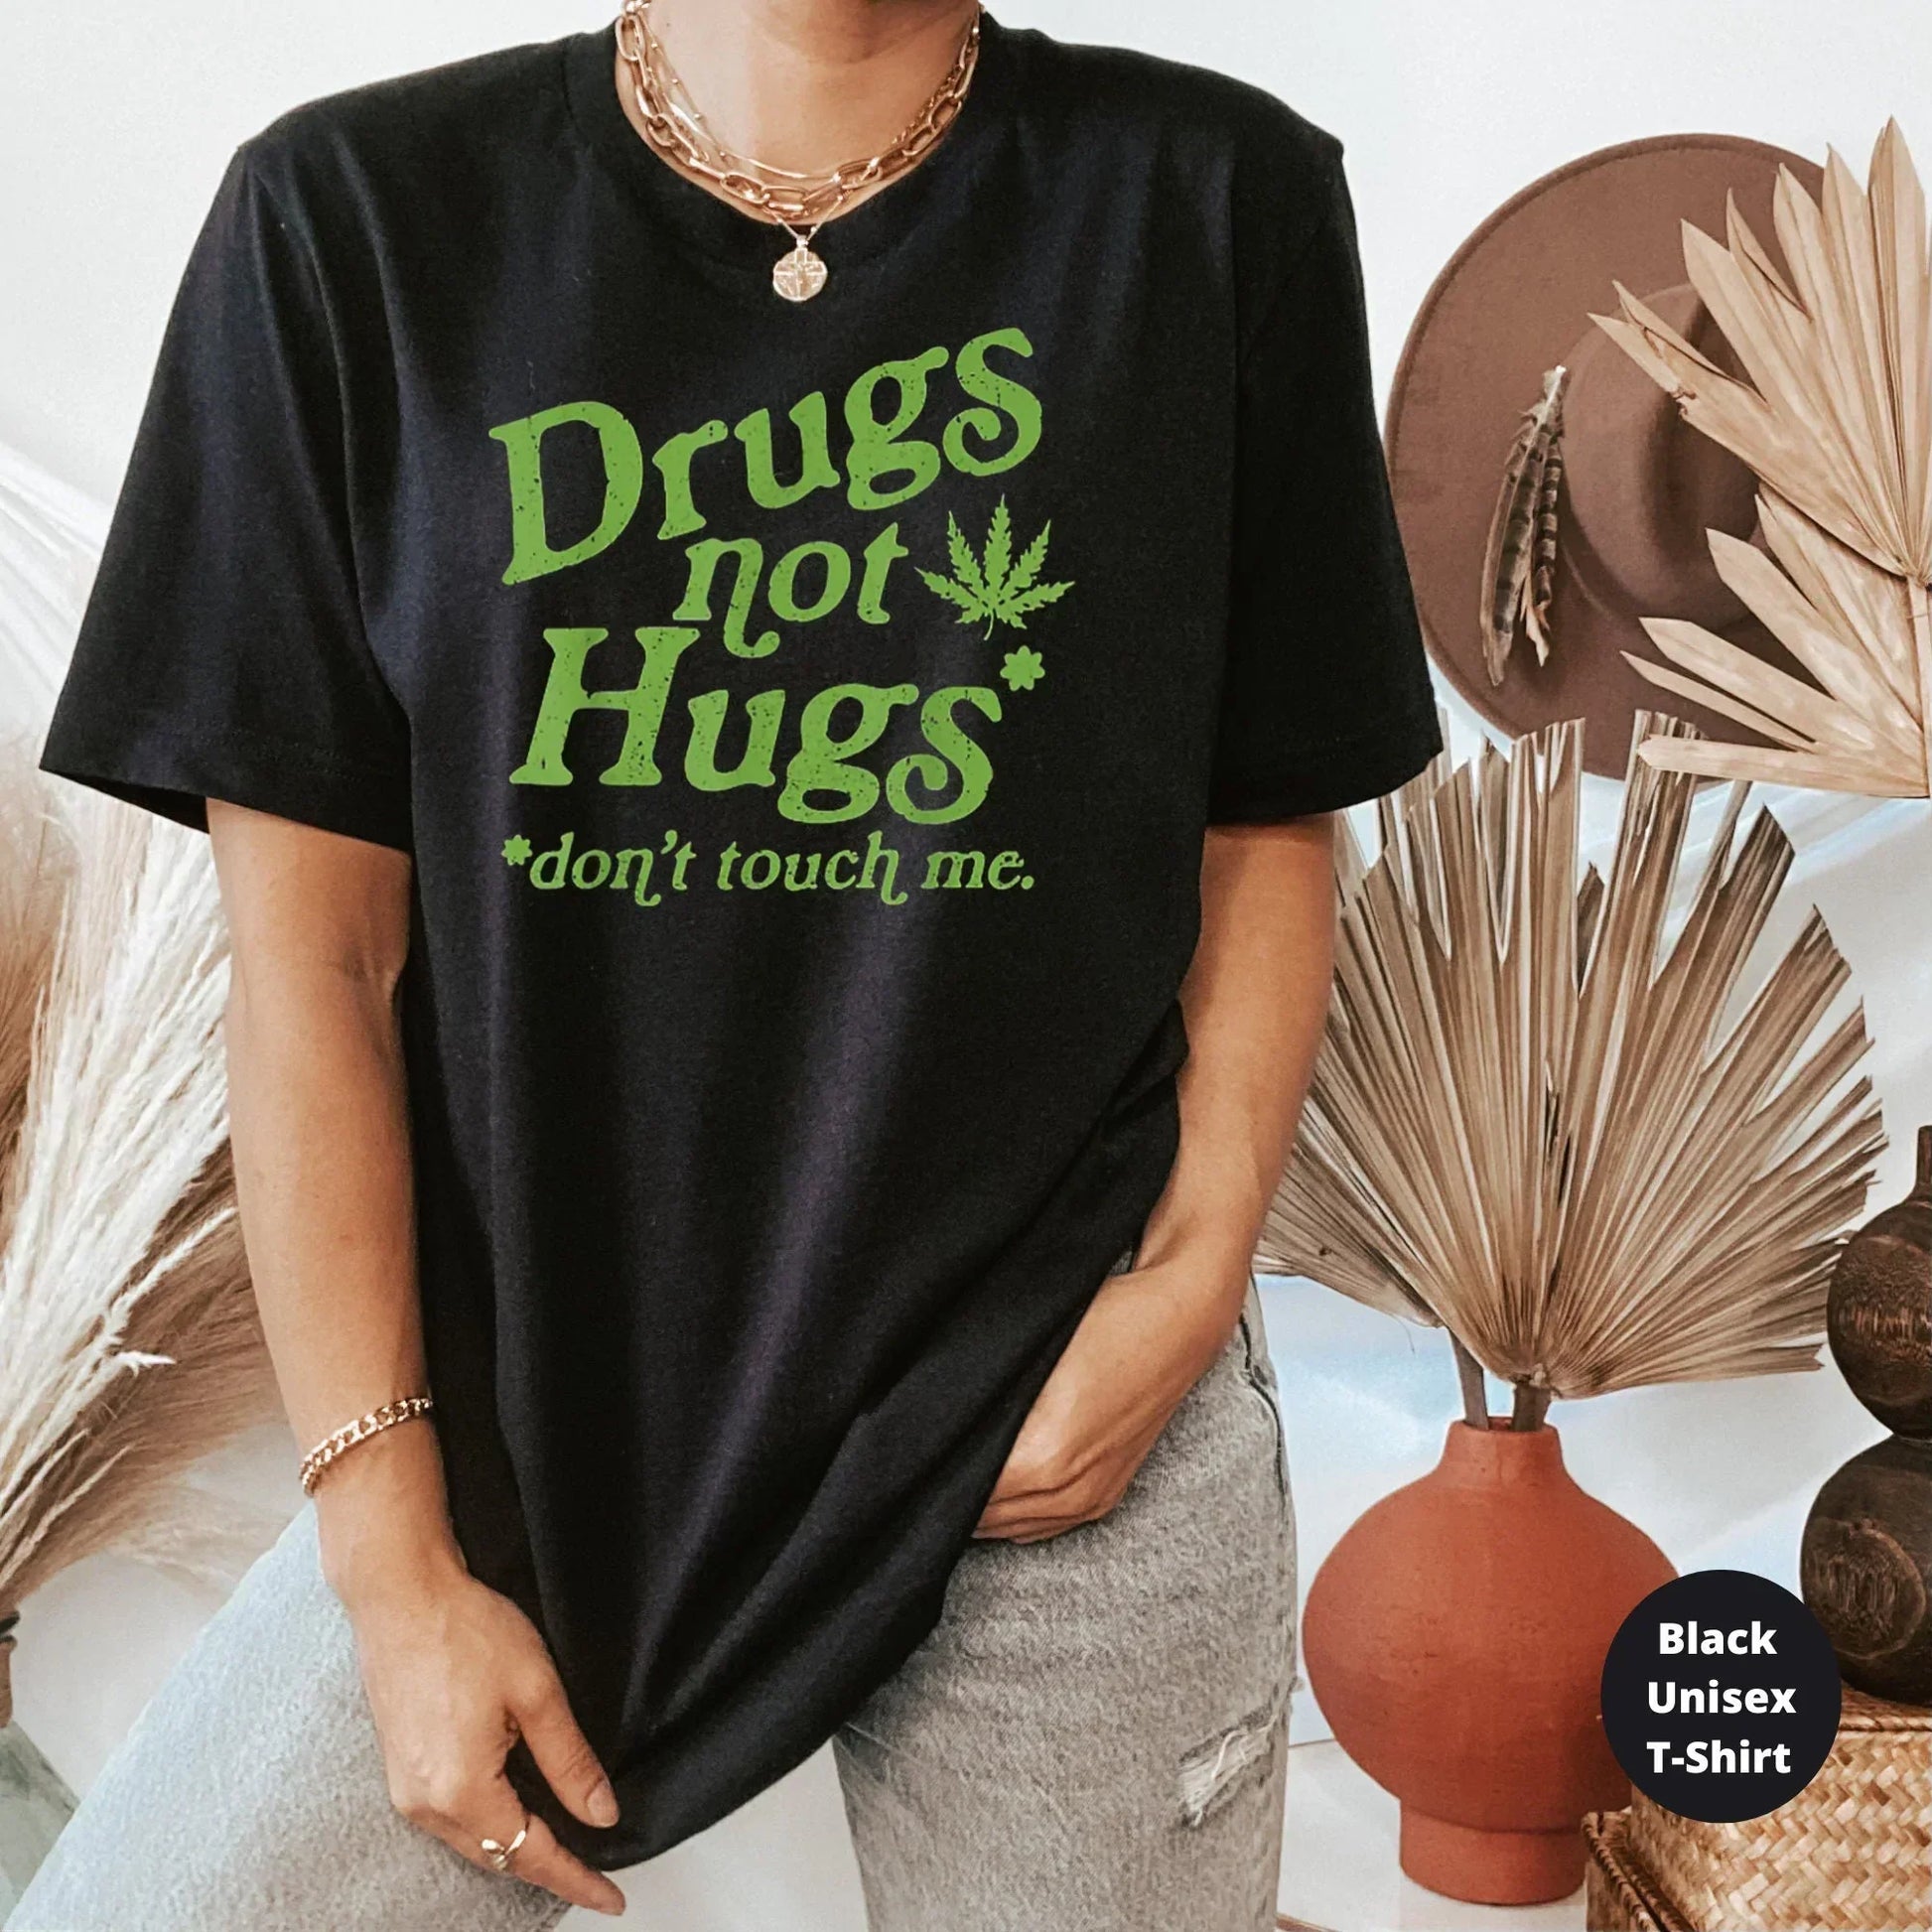 Stoner Gifts, Hippie Clothes, Weed Gifts, Weed Shirt, 420 Gift, Stoner Girl, Cannabis Gift for Him, Stoner Gift for Her, Marijuana T shirts